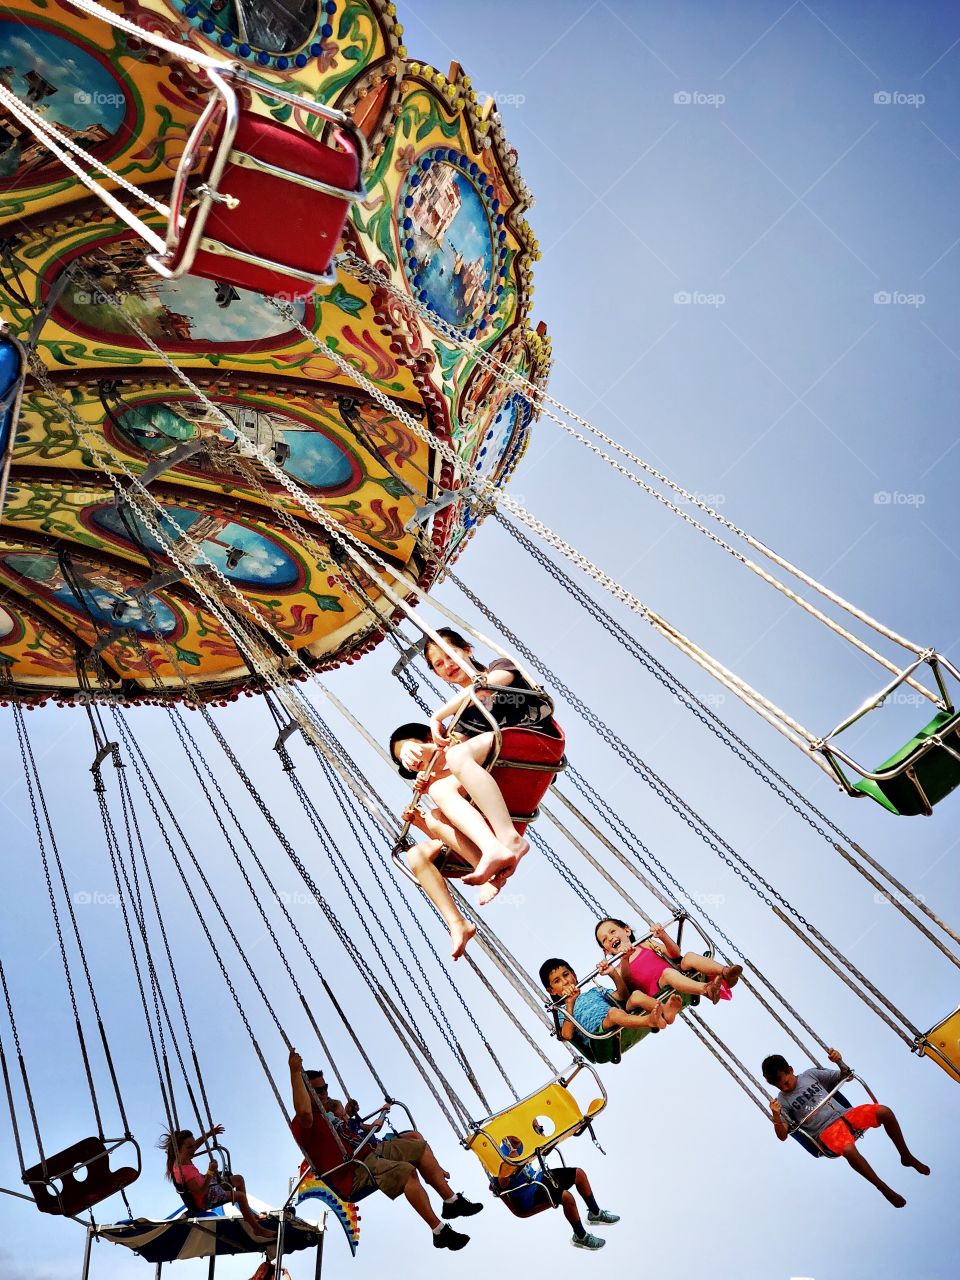 Children riding on colorful metal swings at a beach side amusement park on a sunny day. 